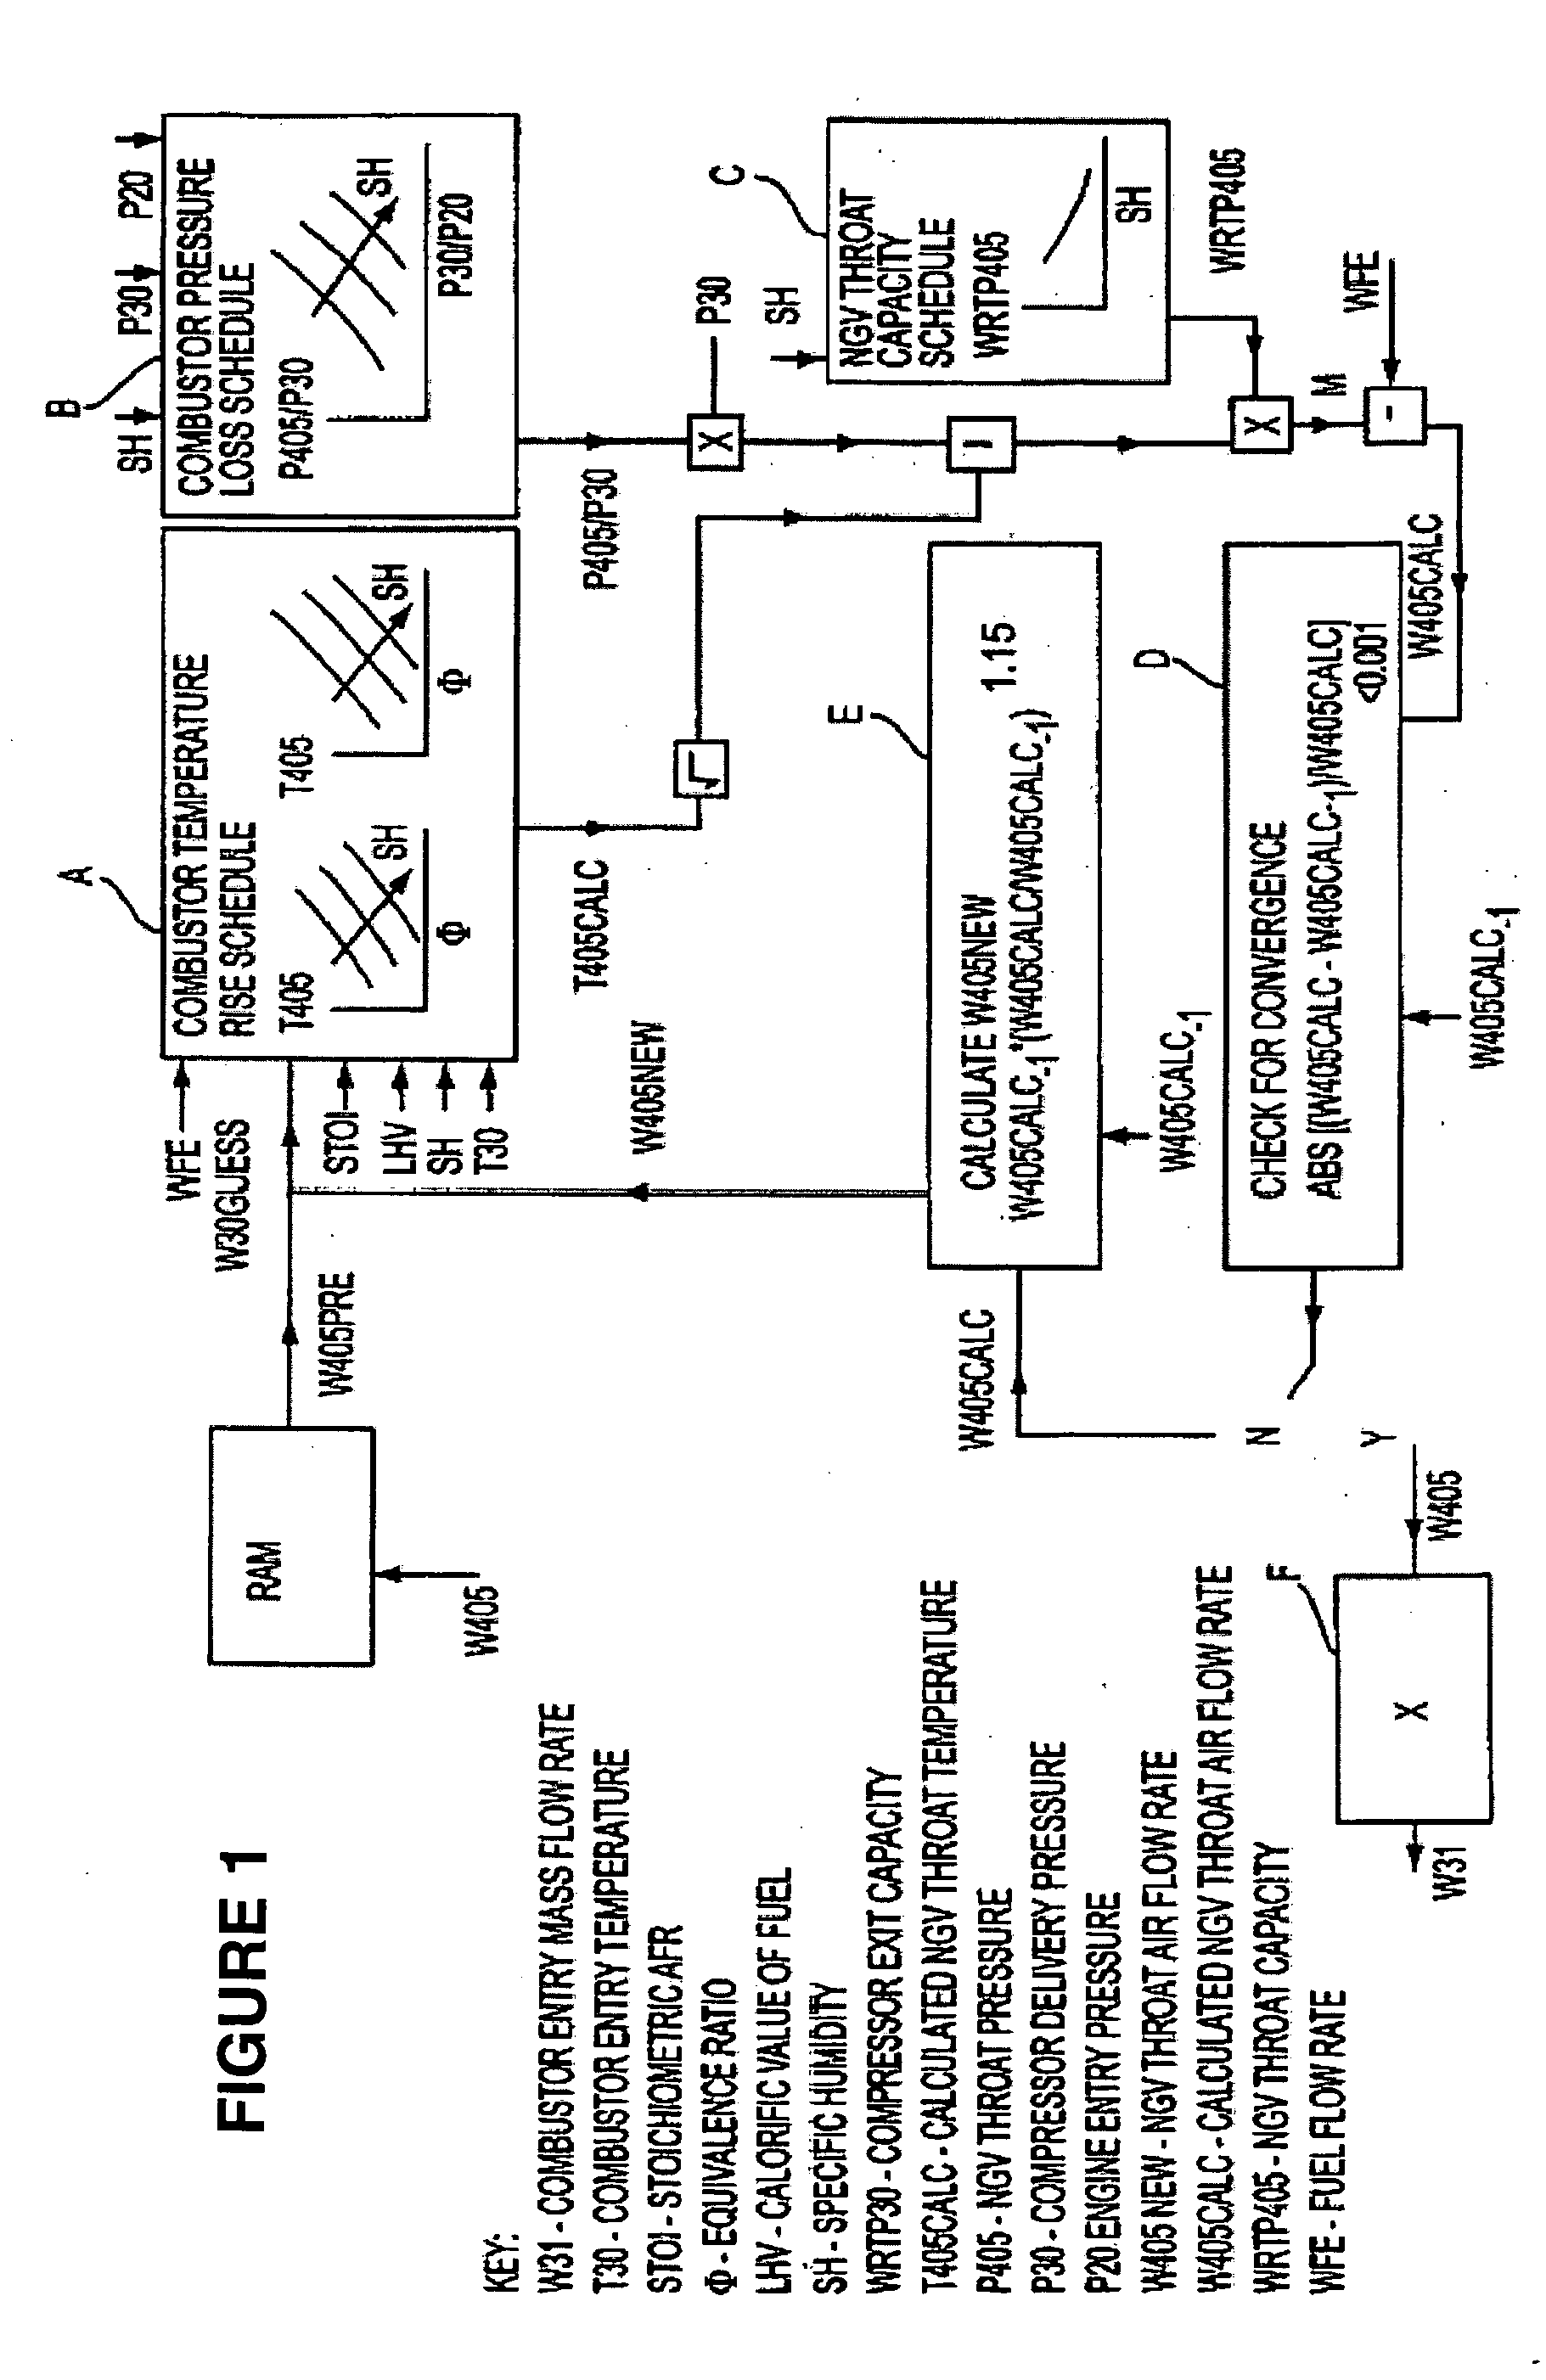 Method and system for operating a multi-stage combustor